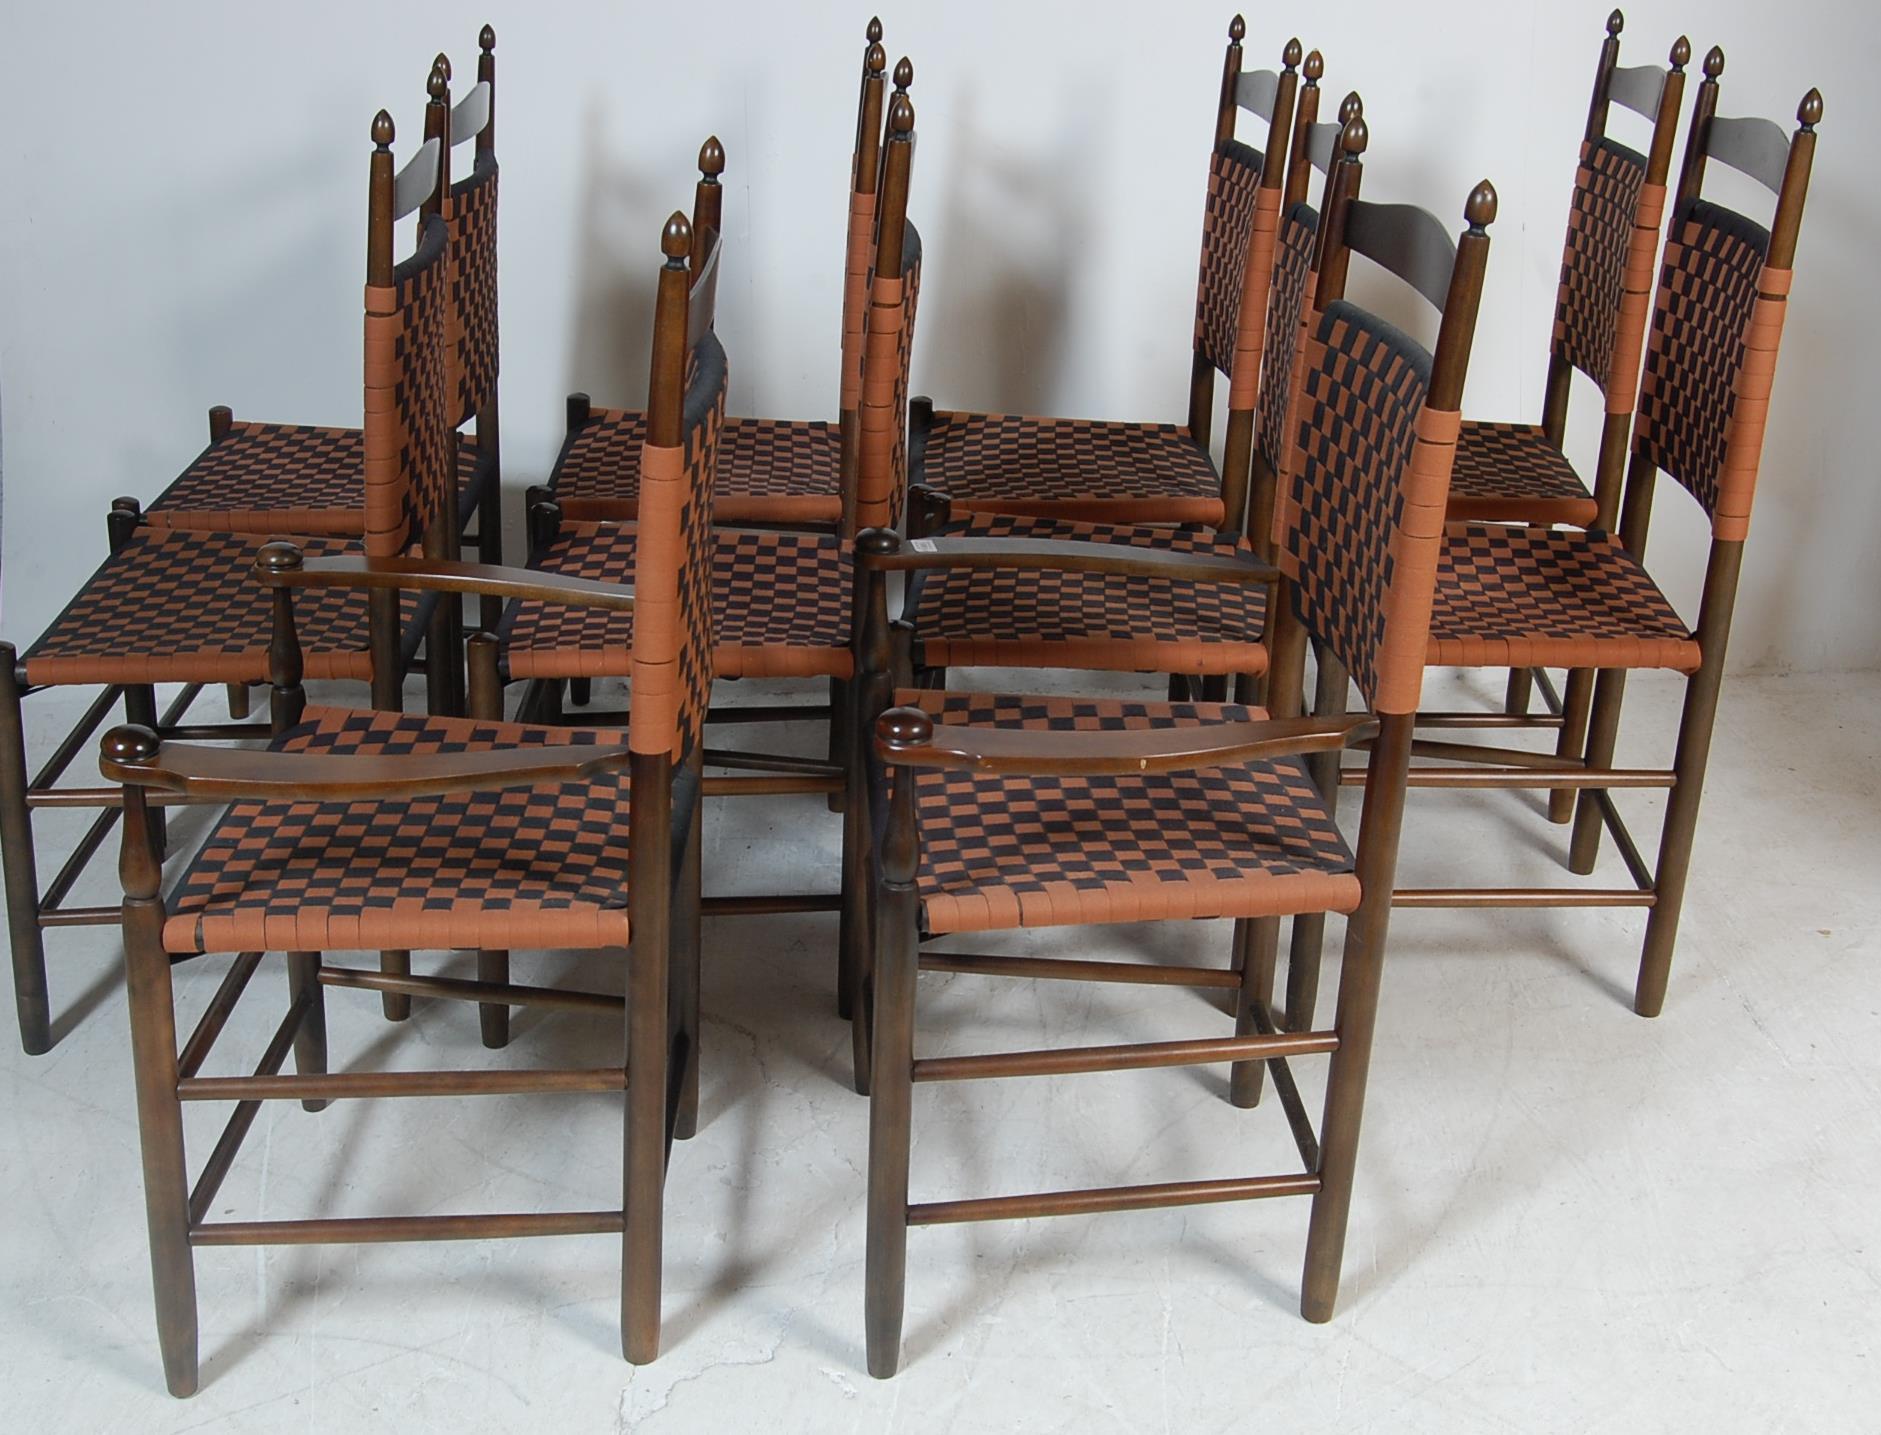 SET OF 10TH VINTAGE STYLE DINING CHAIRS - Image 2 of 6